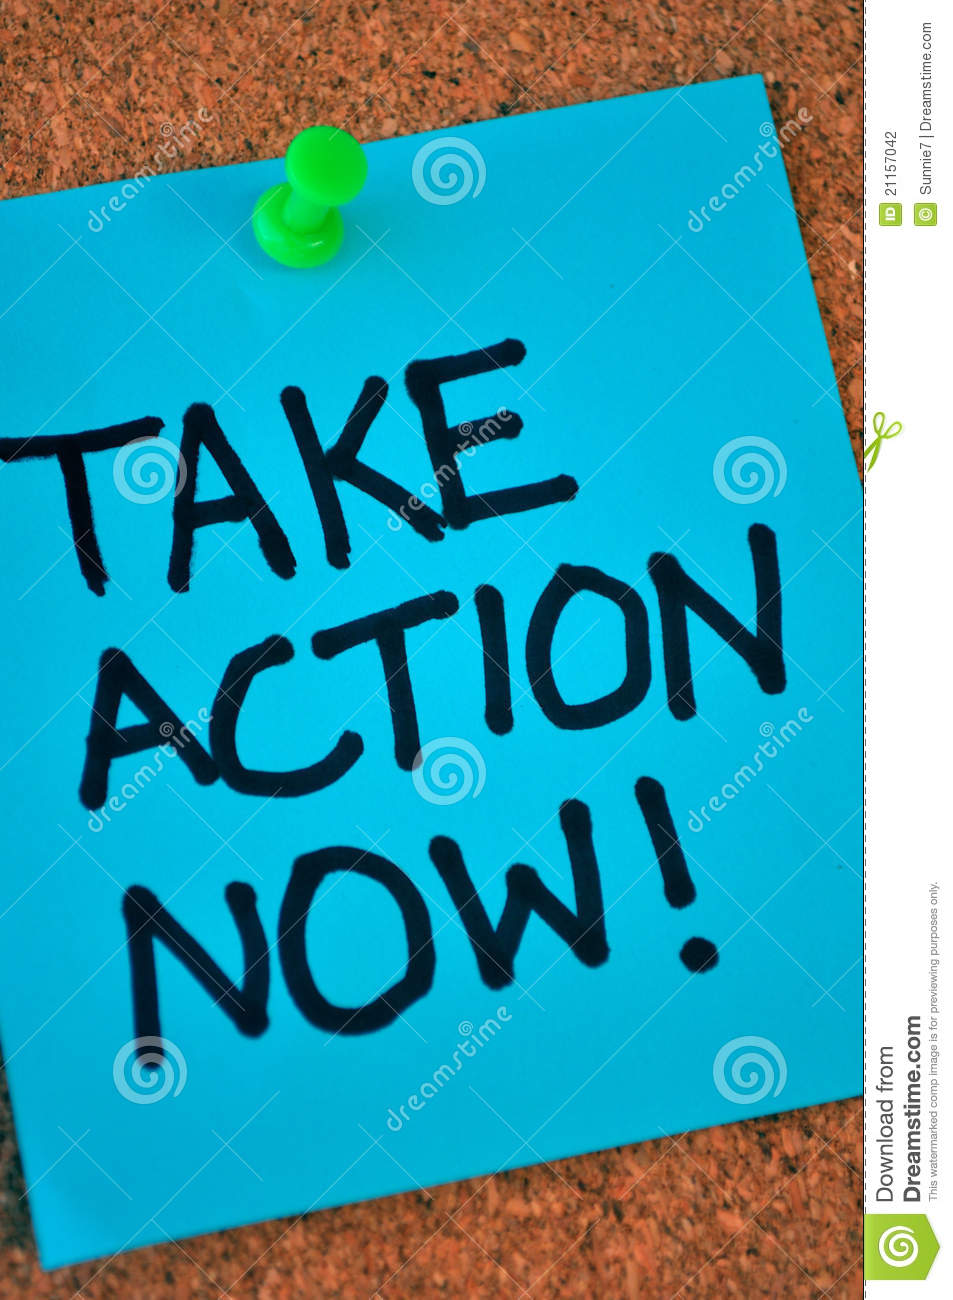 Take Action Now   Are Hand Written On It In Capital Letters In Black